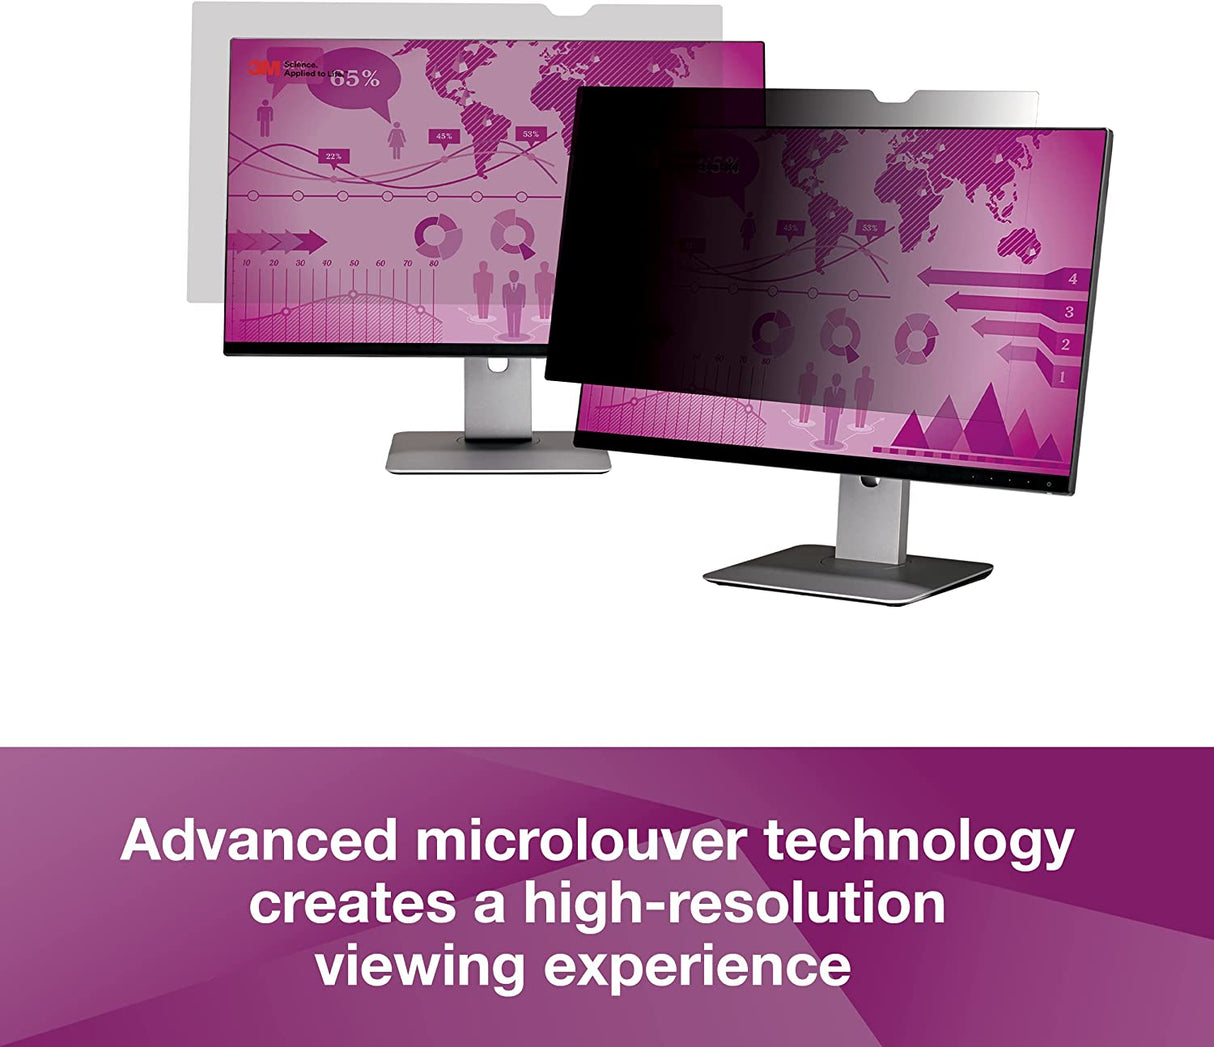 3M High Clarity Privacy Filter for 21.5" Widescreen Monitor (HC215W9B) - Dealtargets.com